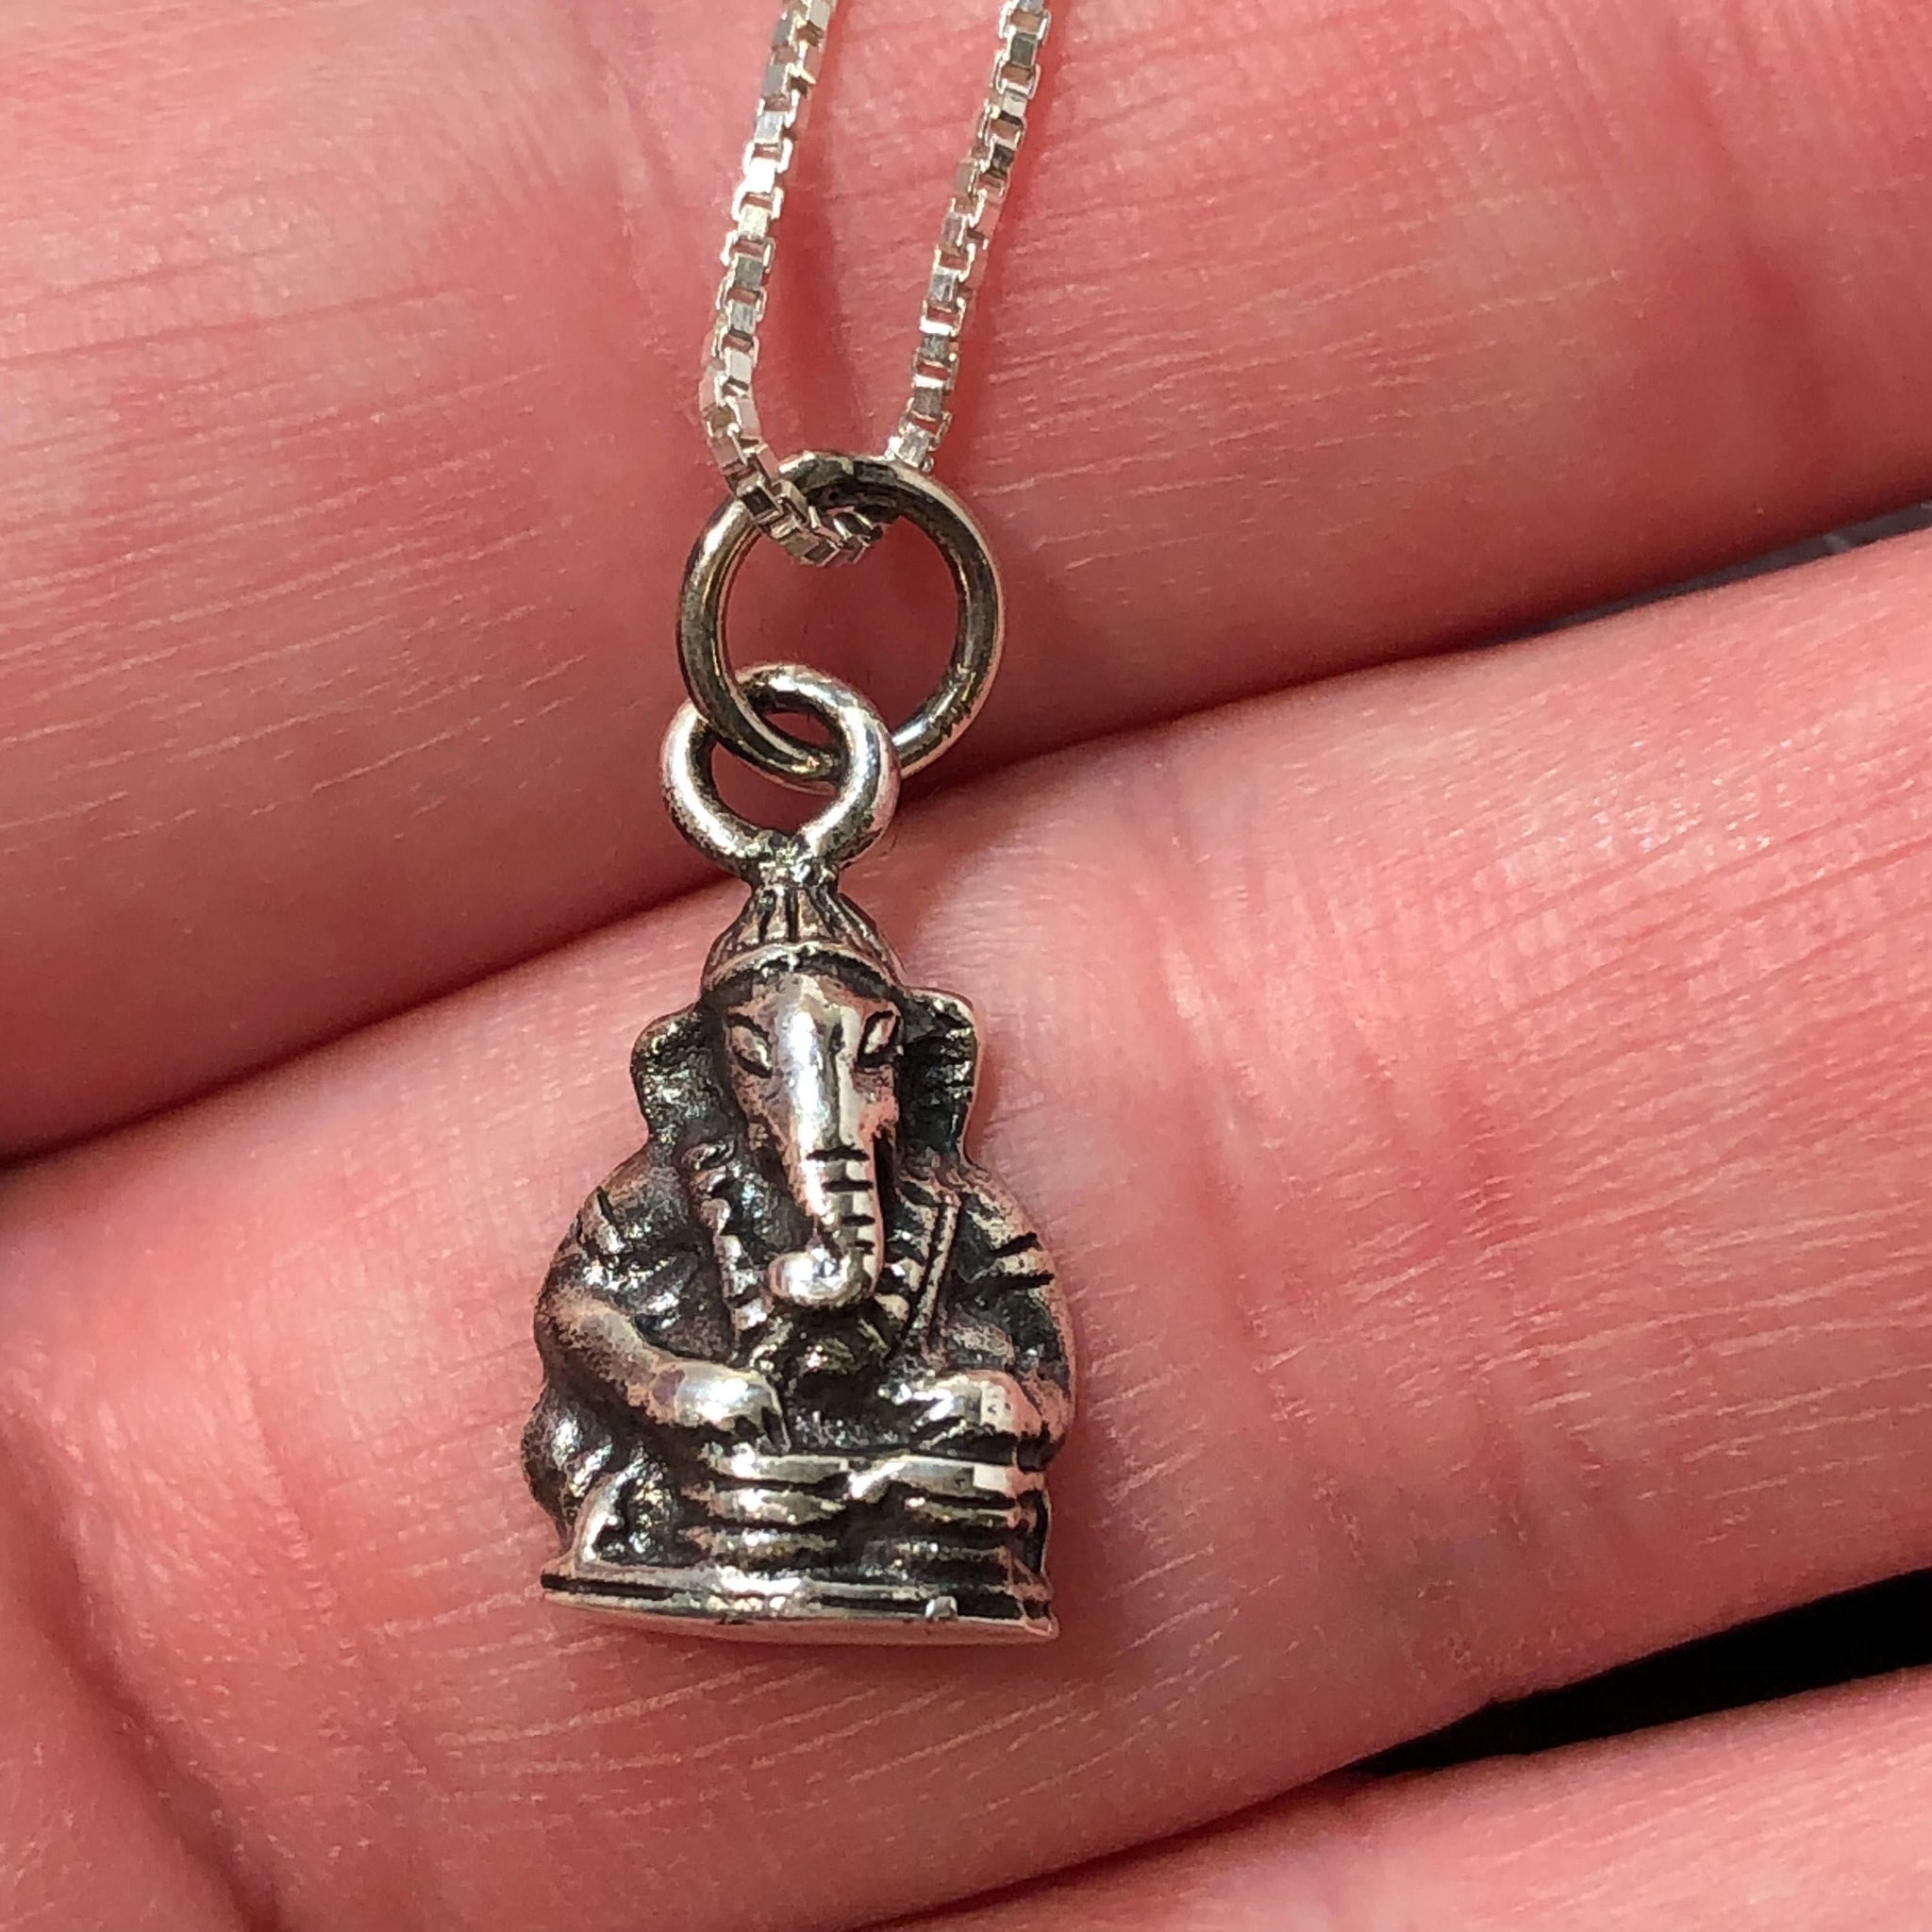 Ganesha Charm Necklace Sterling Silver AlphaVariable Jewelry